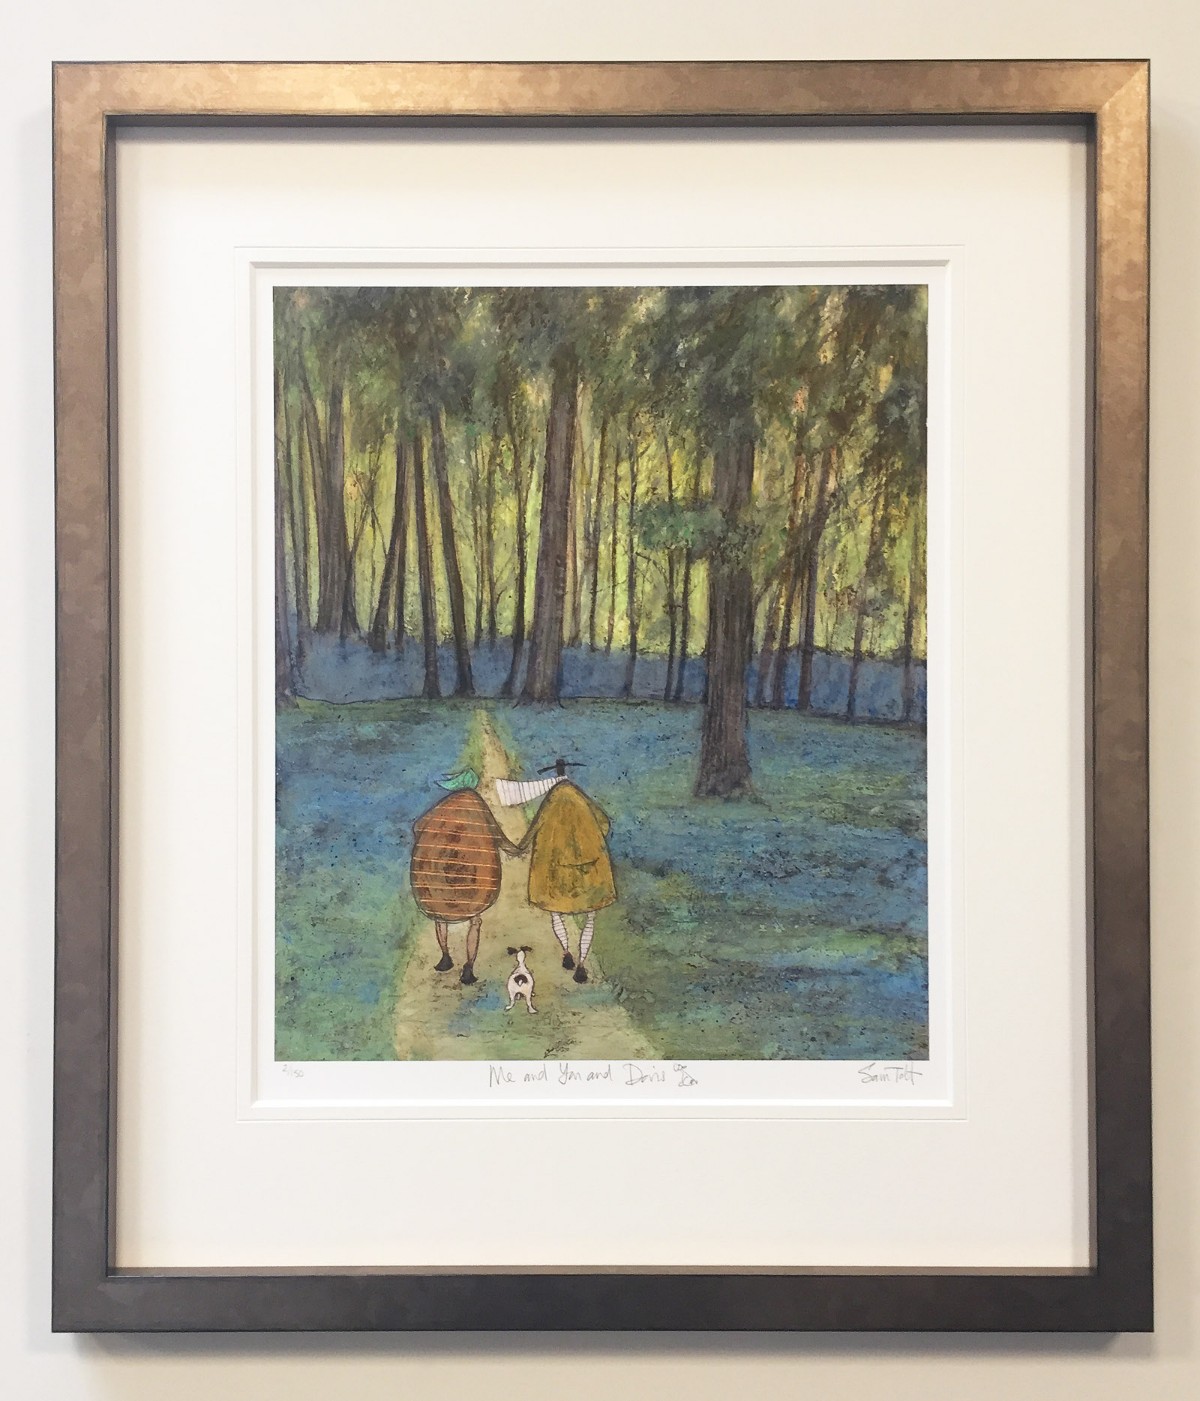 You and Me and Doris (Remarque) by Sam Toft, Figurative | Naive | Landscape | Dog | Couple | Romance